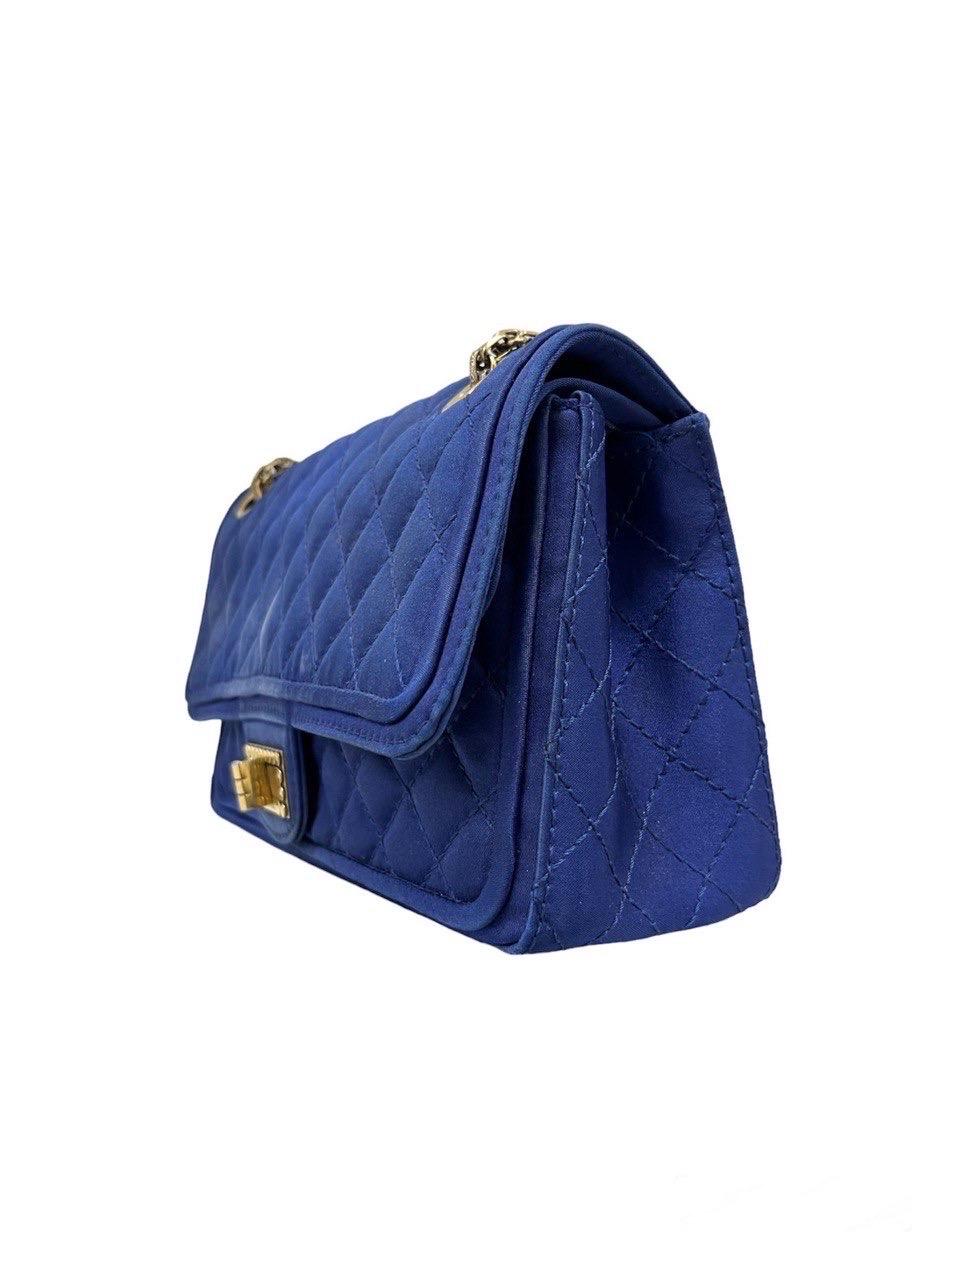 Women's Borsa A Tracolla Chanel Reissue Blue Jersey 2009/2010 For Sale